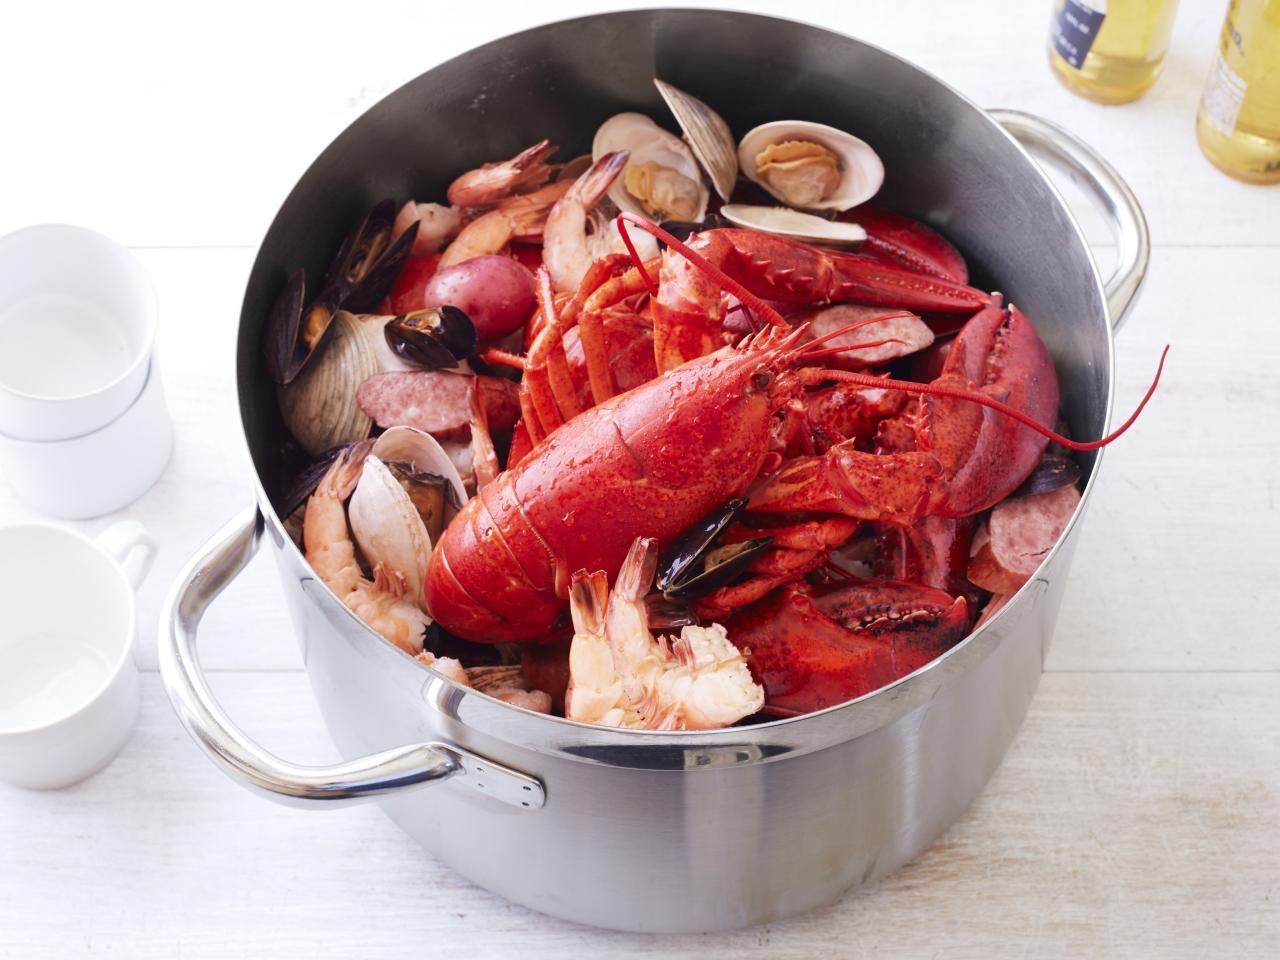 How to host a clambake at home - Reviewed